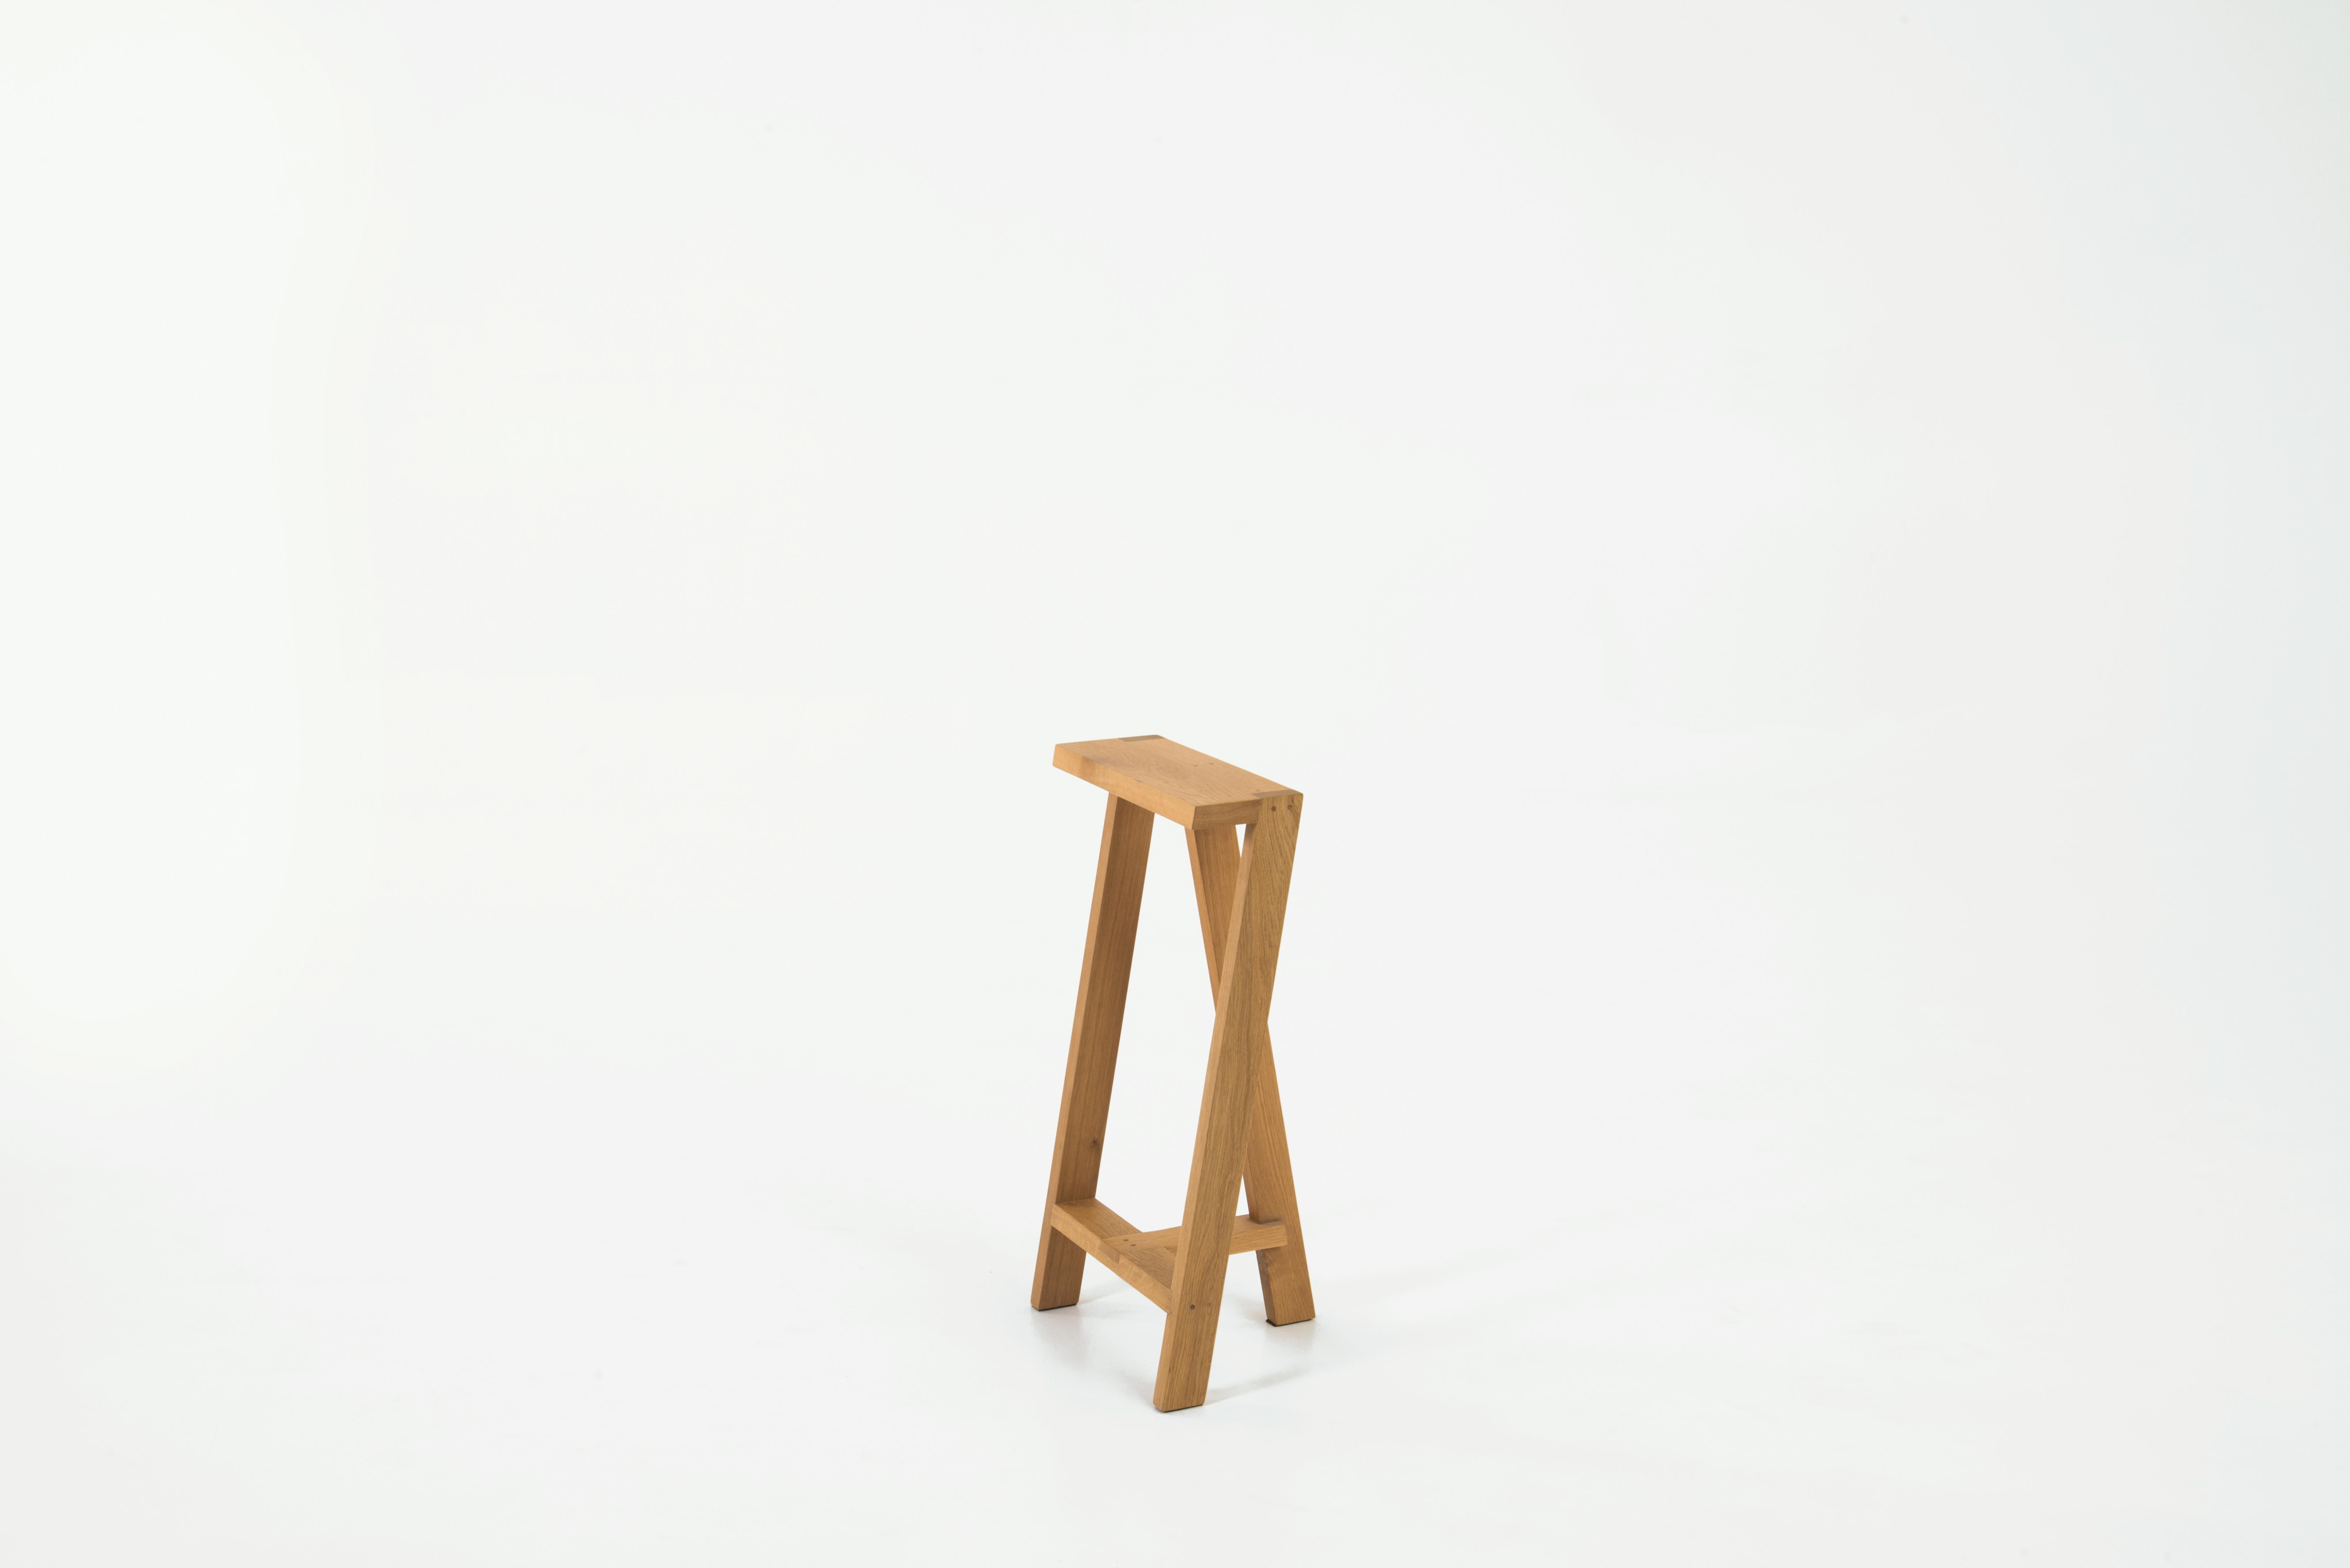 Large Pausa oak stool by Pierre-Emmanuel Vandeputte
Dimensions: D 32 x W 35 x H 80 cm
Materials: oak wood
Available in burnt oak version and in 3 sizes.

Pausa is a series of stools; 45cm, 65cm, or 80cm of assembled oak pieces. 
The narrow